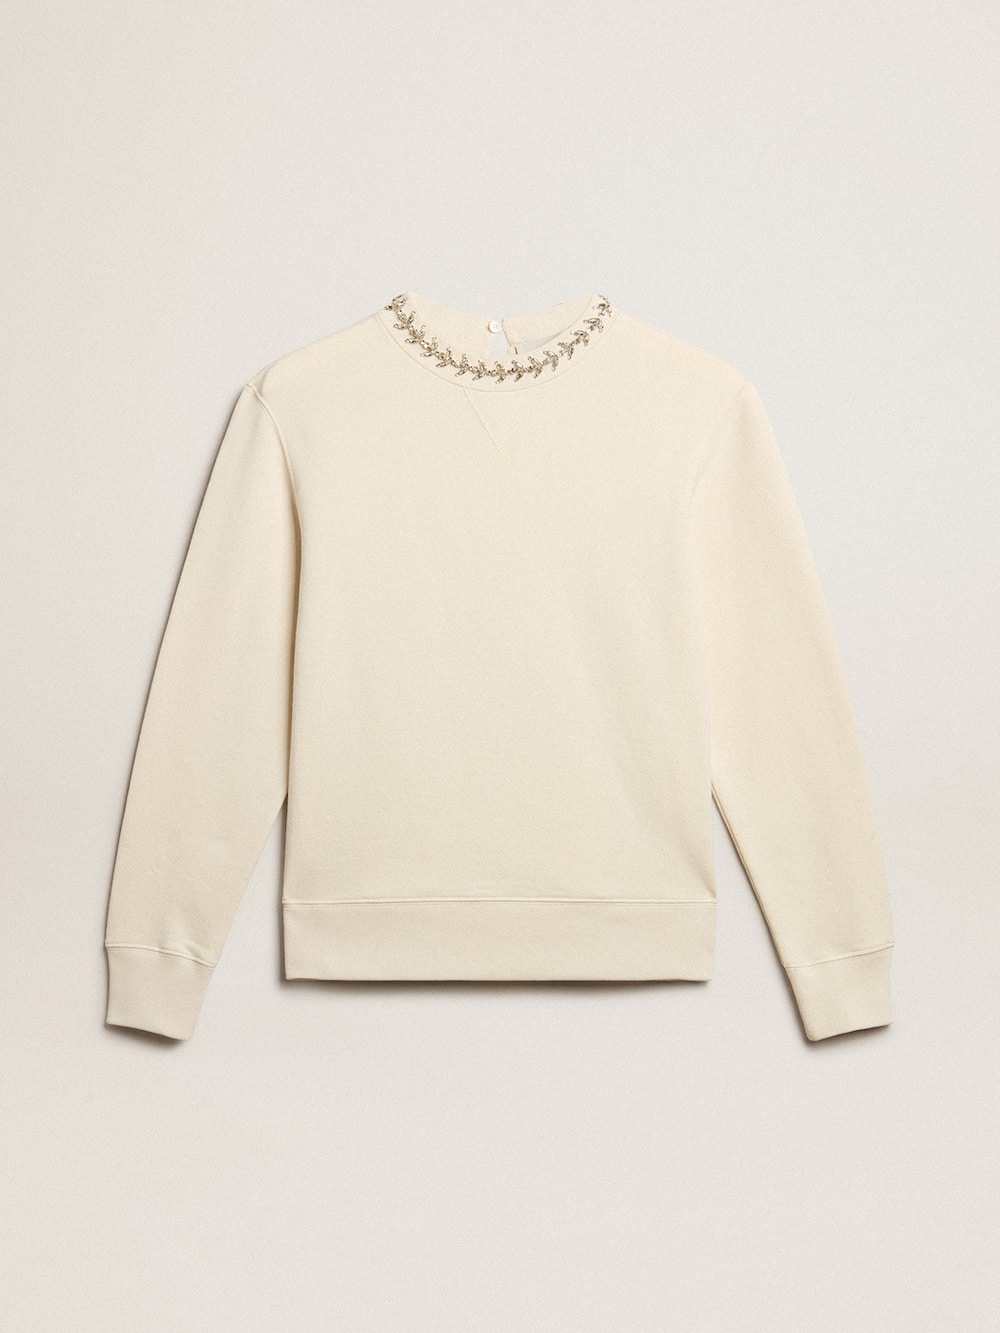 Golden Goose - Round-neck cotton sweatshirt in aged white with hand-applied crystals in 